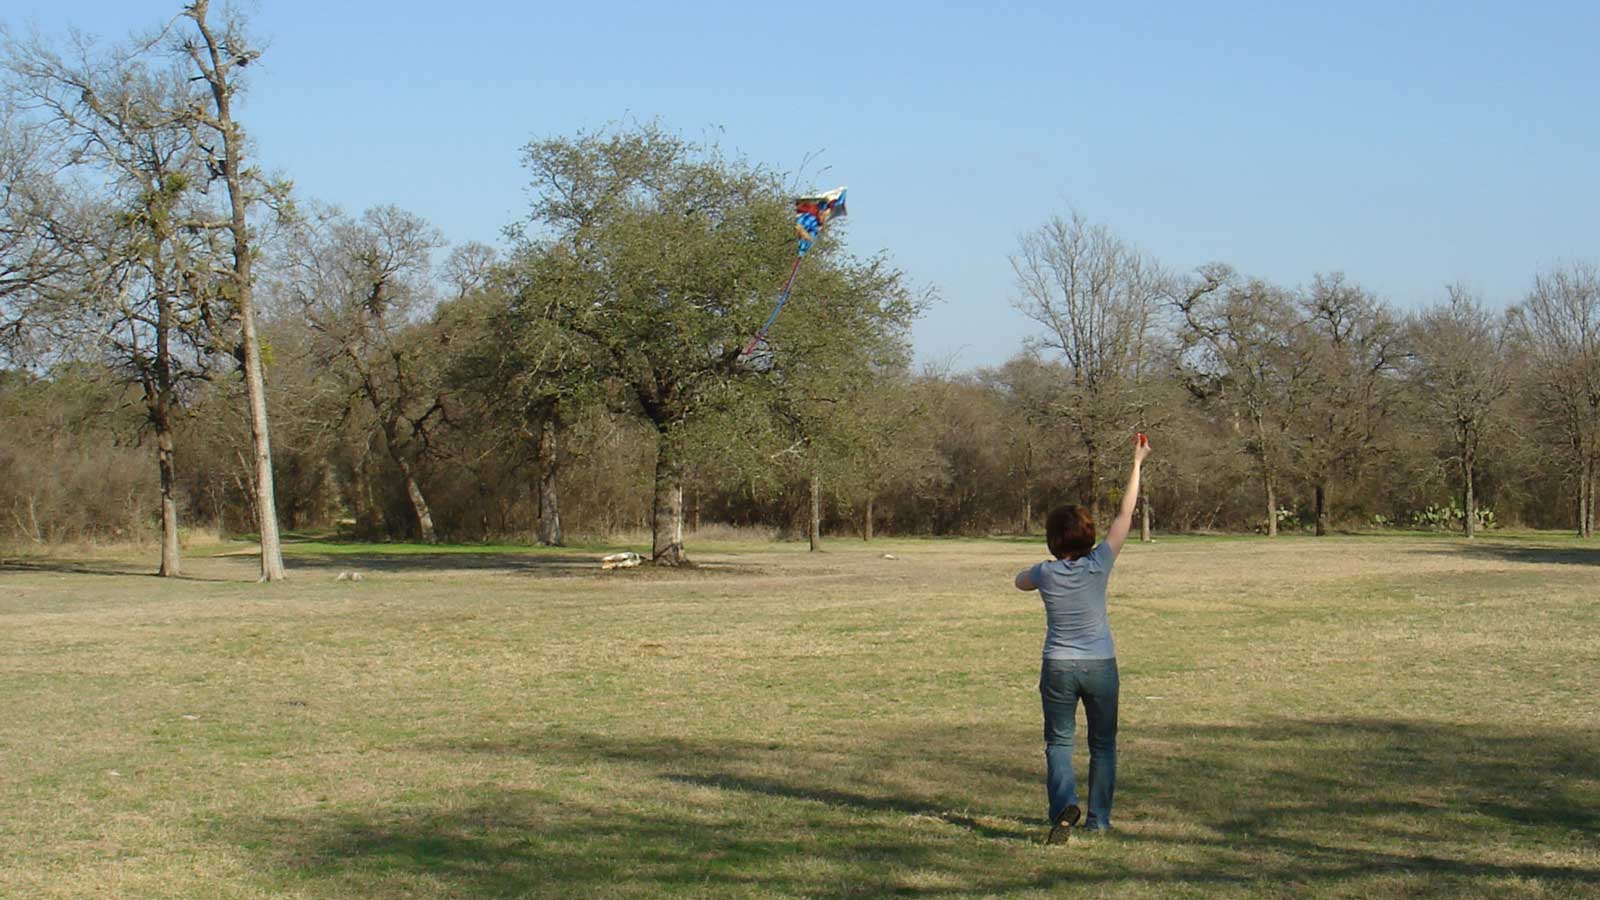 Rebecca with her kite